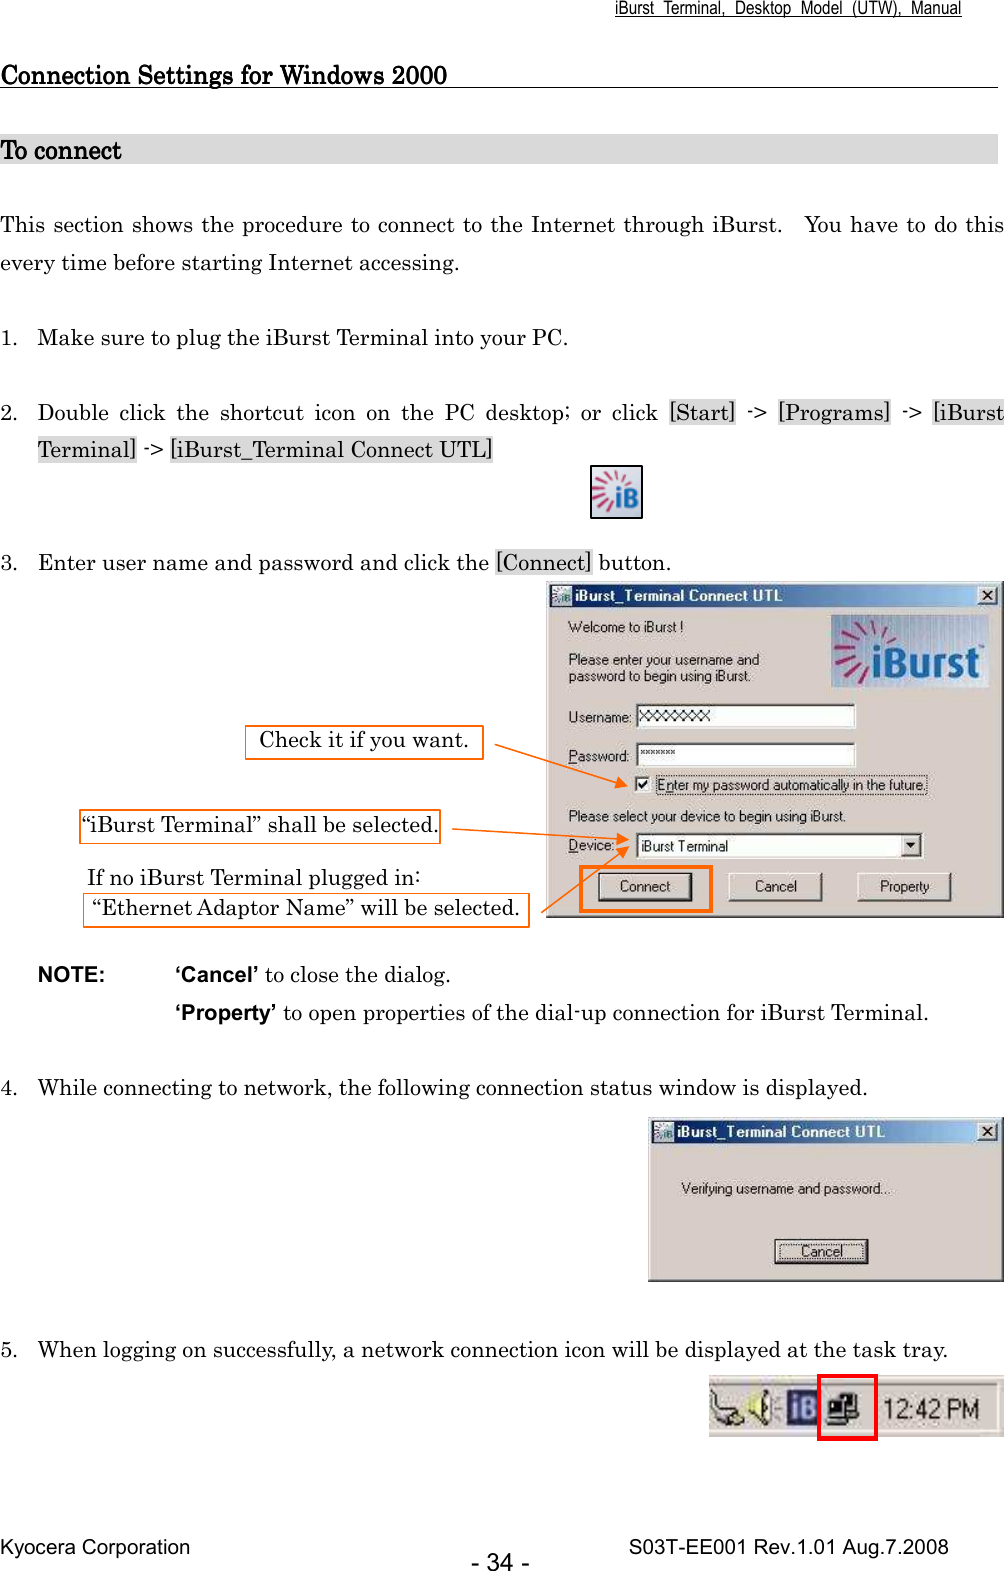 iBurst  Terminal,  Desktop  Model  (UTW),  Manual Kyocera Corporation                                                                                    S03T-EE001 Rev.1.01 Aug.7.2008 - 34 - Connection Connection Connection Connection SettingsSettingsSettingsSettings for Windows 2000 for Windows 2000 for Windows 2000 for Windows 2000                                                                                                                                                                                                                    To connectTo connectTo connectTo connect                                                                                                                                                                                                                                                                                                                                                                 This section shows the procedure to connect to the Internet through iBurst.    You have to do this every time before starting Internet accessing.  1. Make sure to plug the iBurst Terminal into your PC.  2. Double  click  the  shortcut  icon  on  the  PC  desktop;  or  click  [Start]  -&gt;  [Programs]  -&gt;  [iBurst Terminal] -&gt; [iBurst_Terminal Connect UTL]   3. Enter user name and password and click the [Connect] button.     NOTE:  ‘Cancel’ to close the dialog. ‘Property’ to open properties of the dial-up connection for iBurst Terminal.  4. While connecting to network, the following connection status window is displayed.   5. When logging on successfully, a network connection icon will be displayed at the task tray.   “iBurst Terminal” shall be selected. Check it if you want. “Ethernet Adaptor Name” will be selected. If no iBurst Terminal plugged in: 